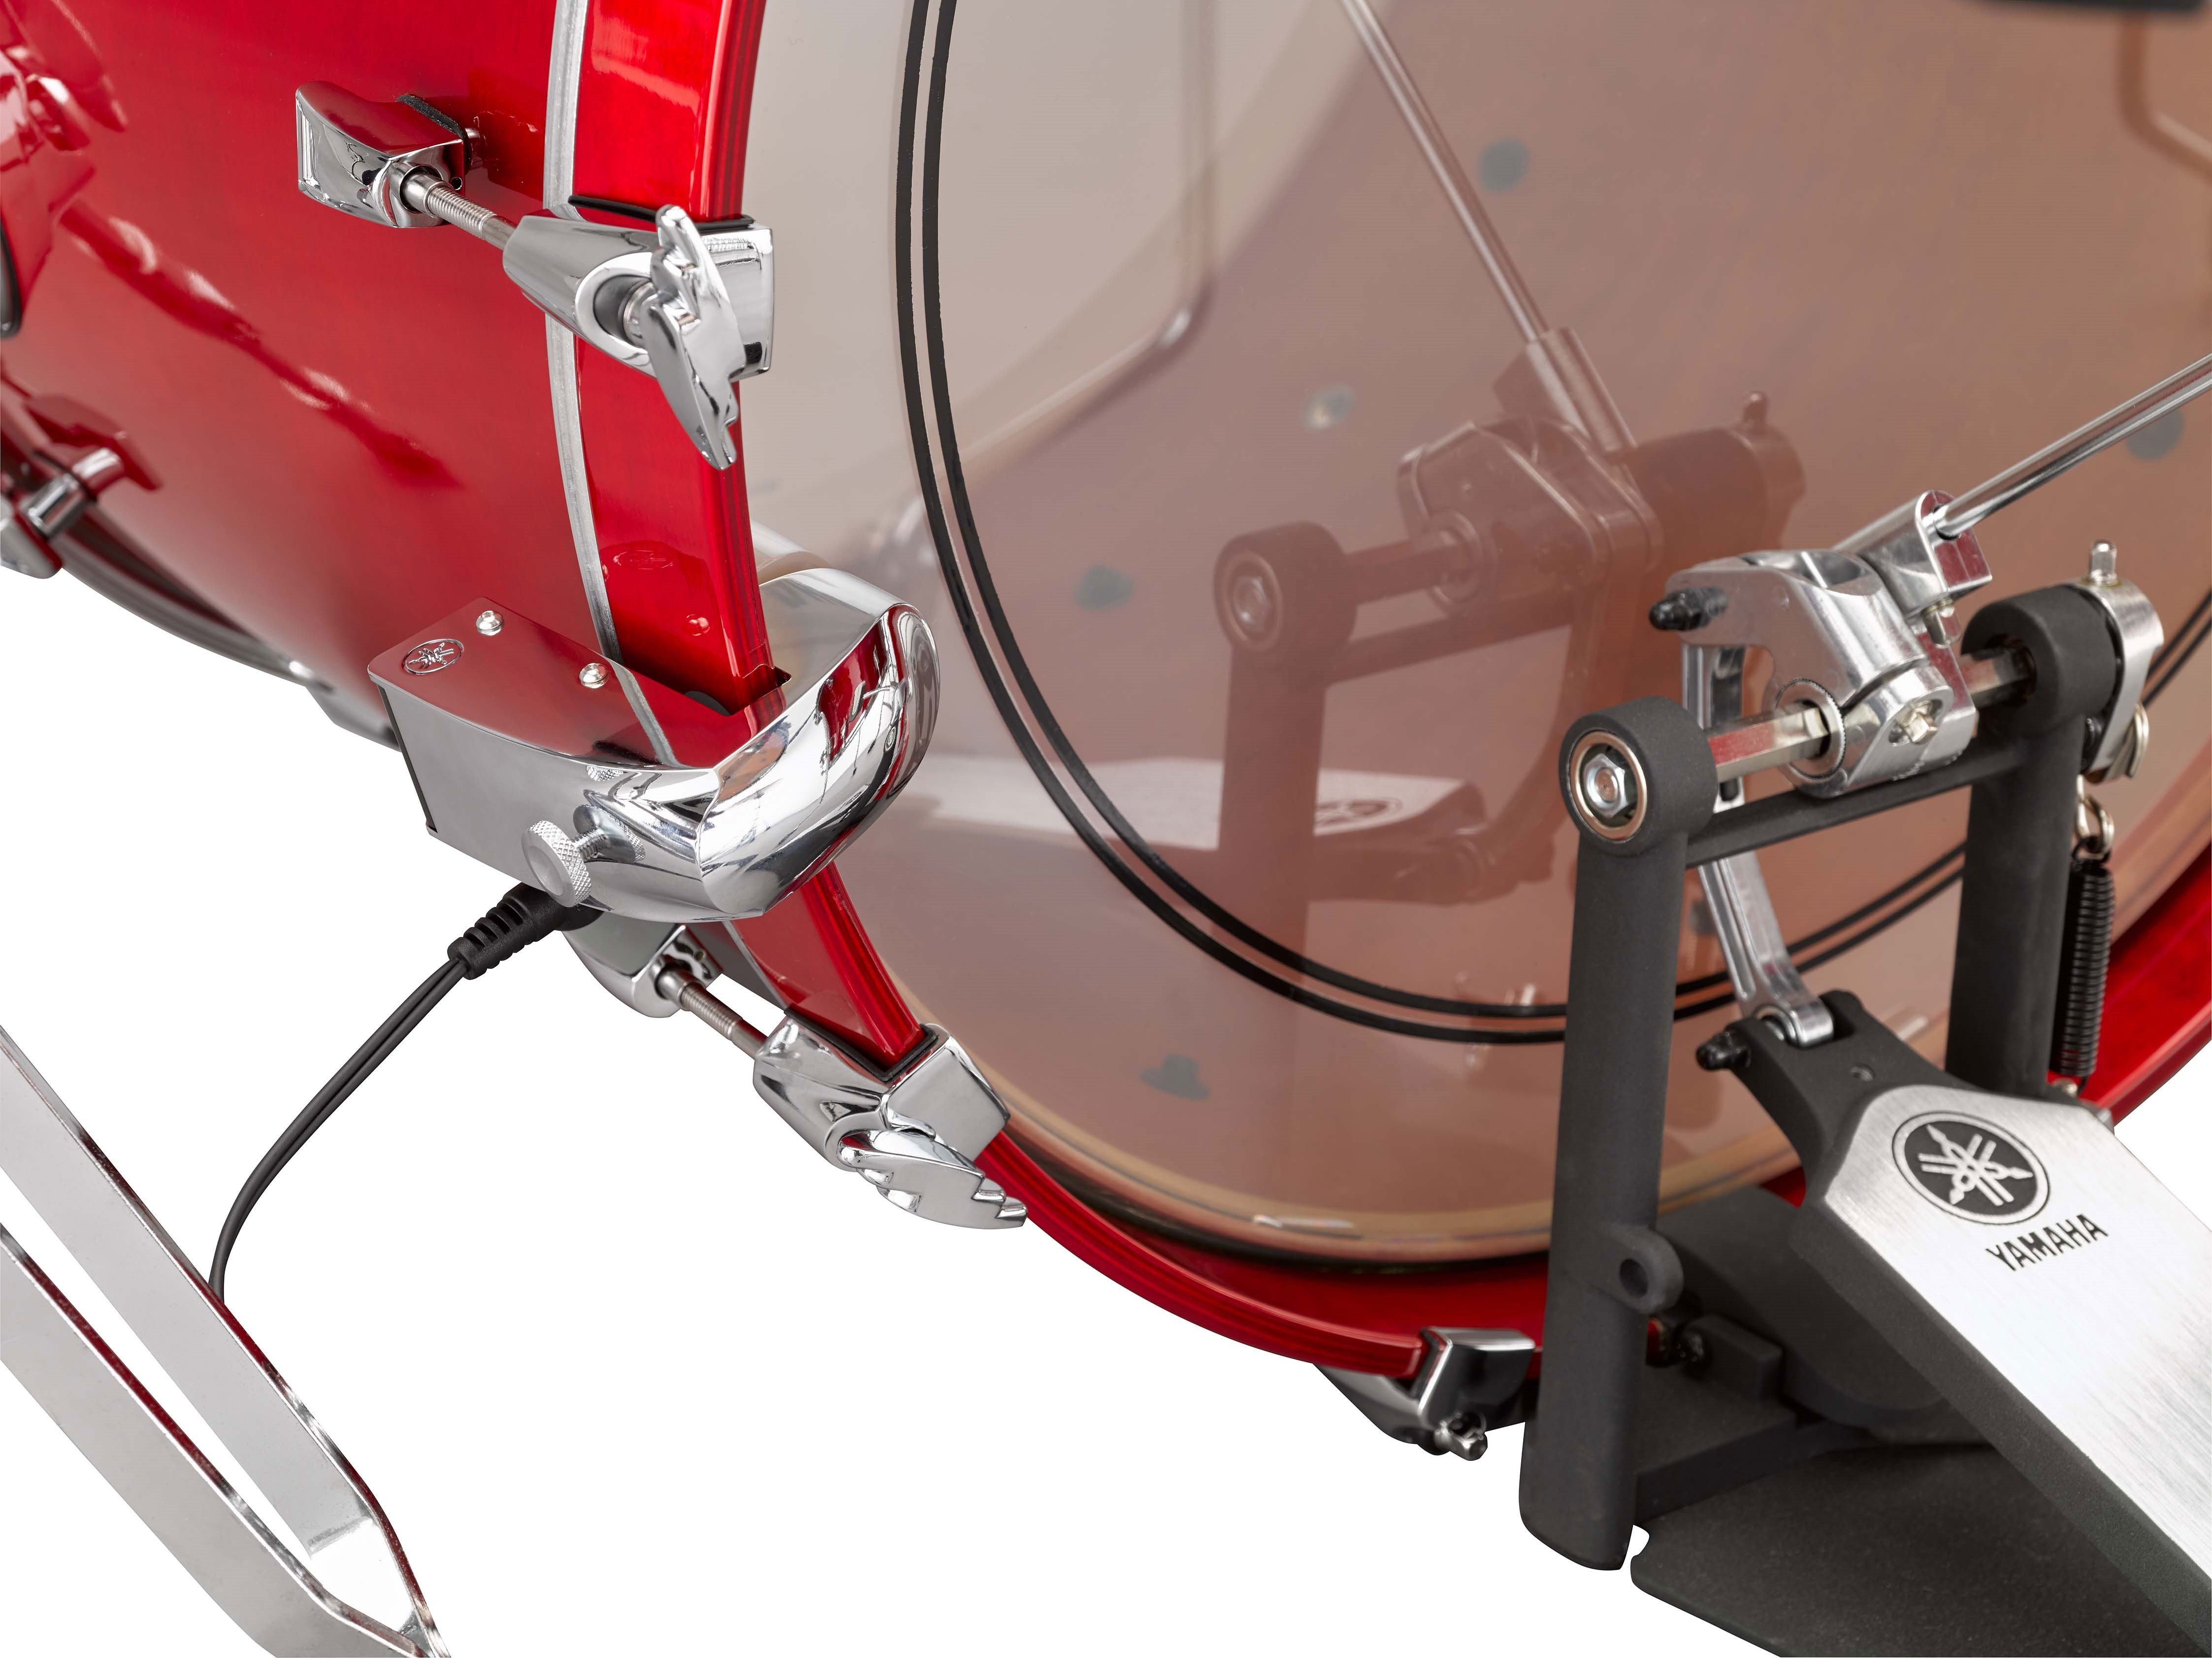 DT-50K - Overview - Drum Triggers - DTX Electronic Drums, Modules, and  Hardware - Drums - Musical Instruments - Products - Yamaha USA